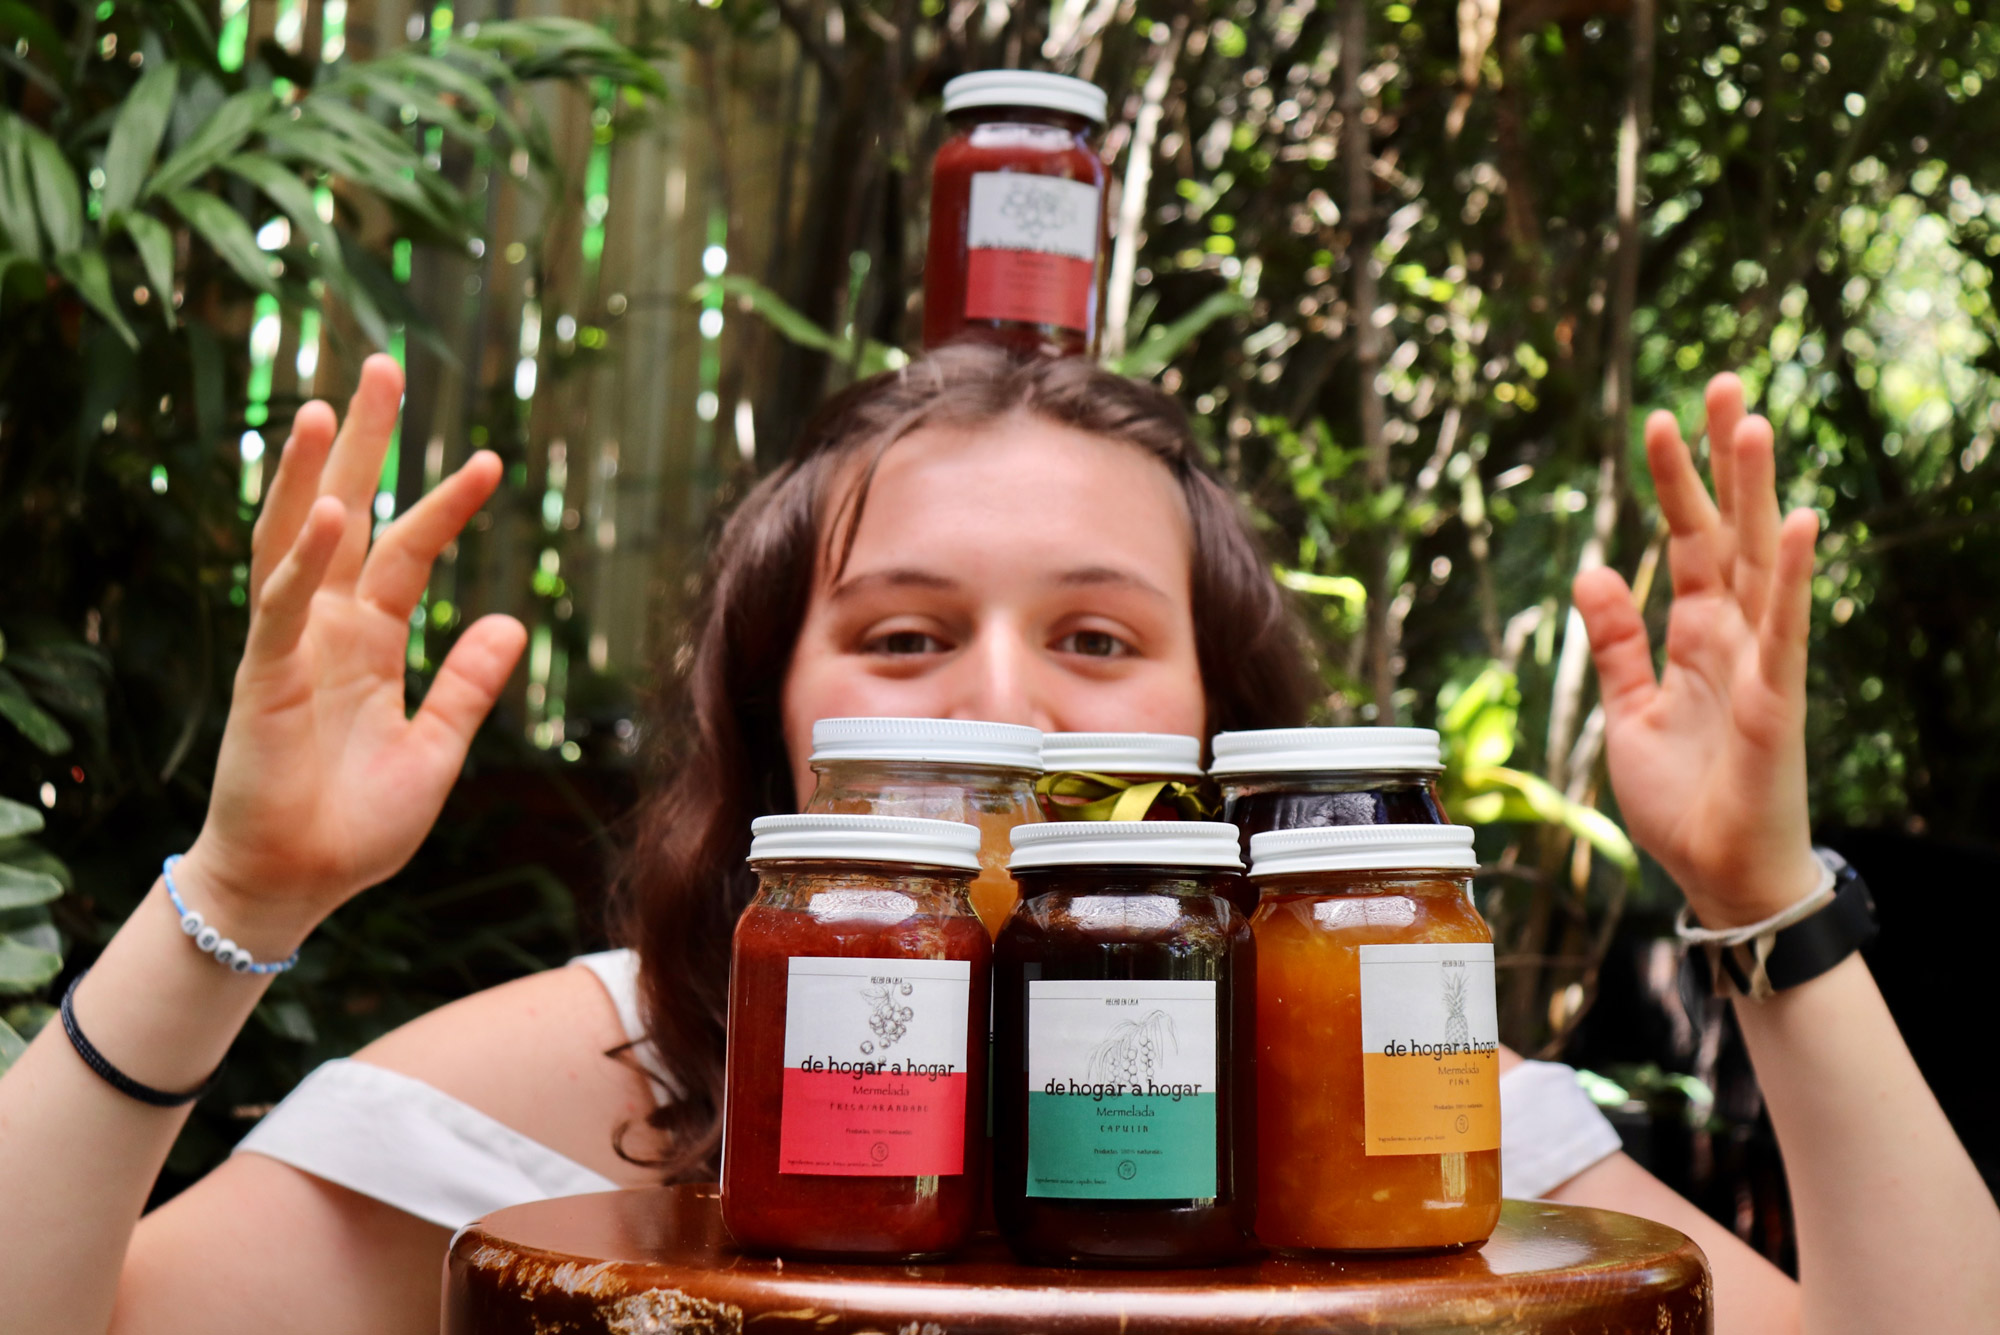 A photo of Inés Santacruz holding jars of jams and preserves up in front of her face. Several jars also sit on a table in front of her.